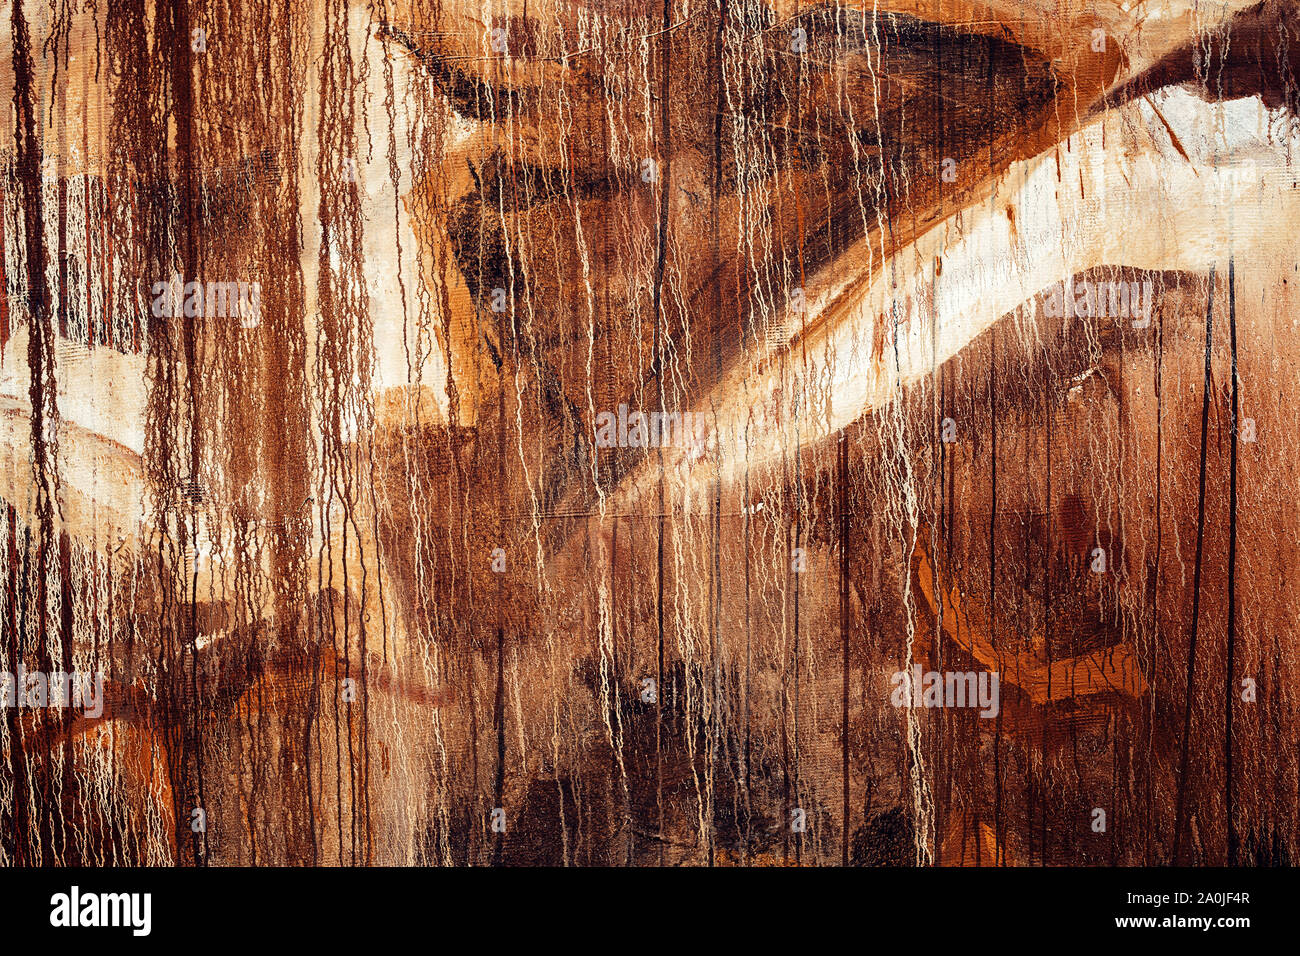 Grunge paint spill pattern background, messy brown surface texture Stock Photo